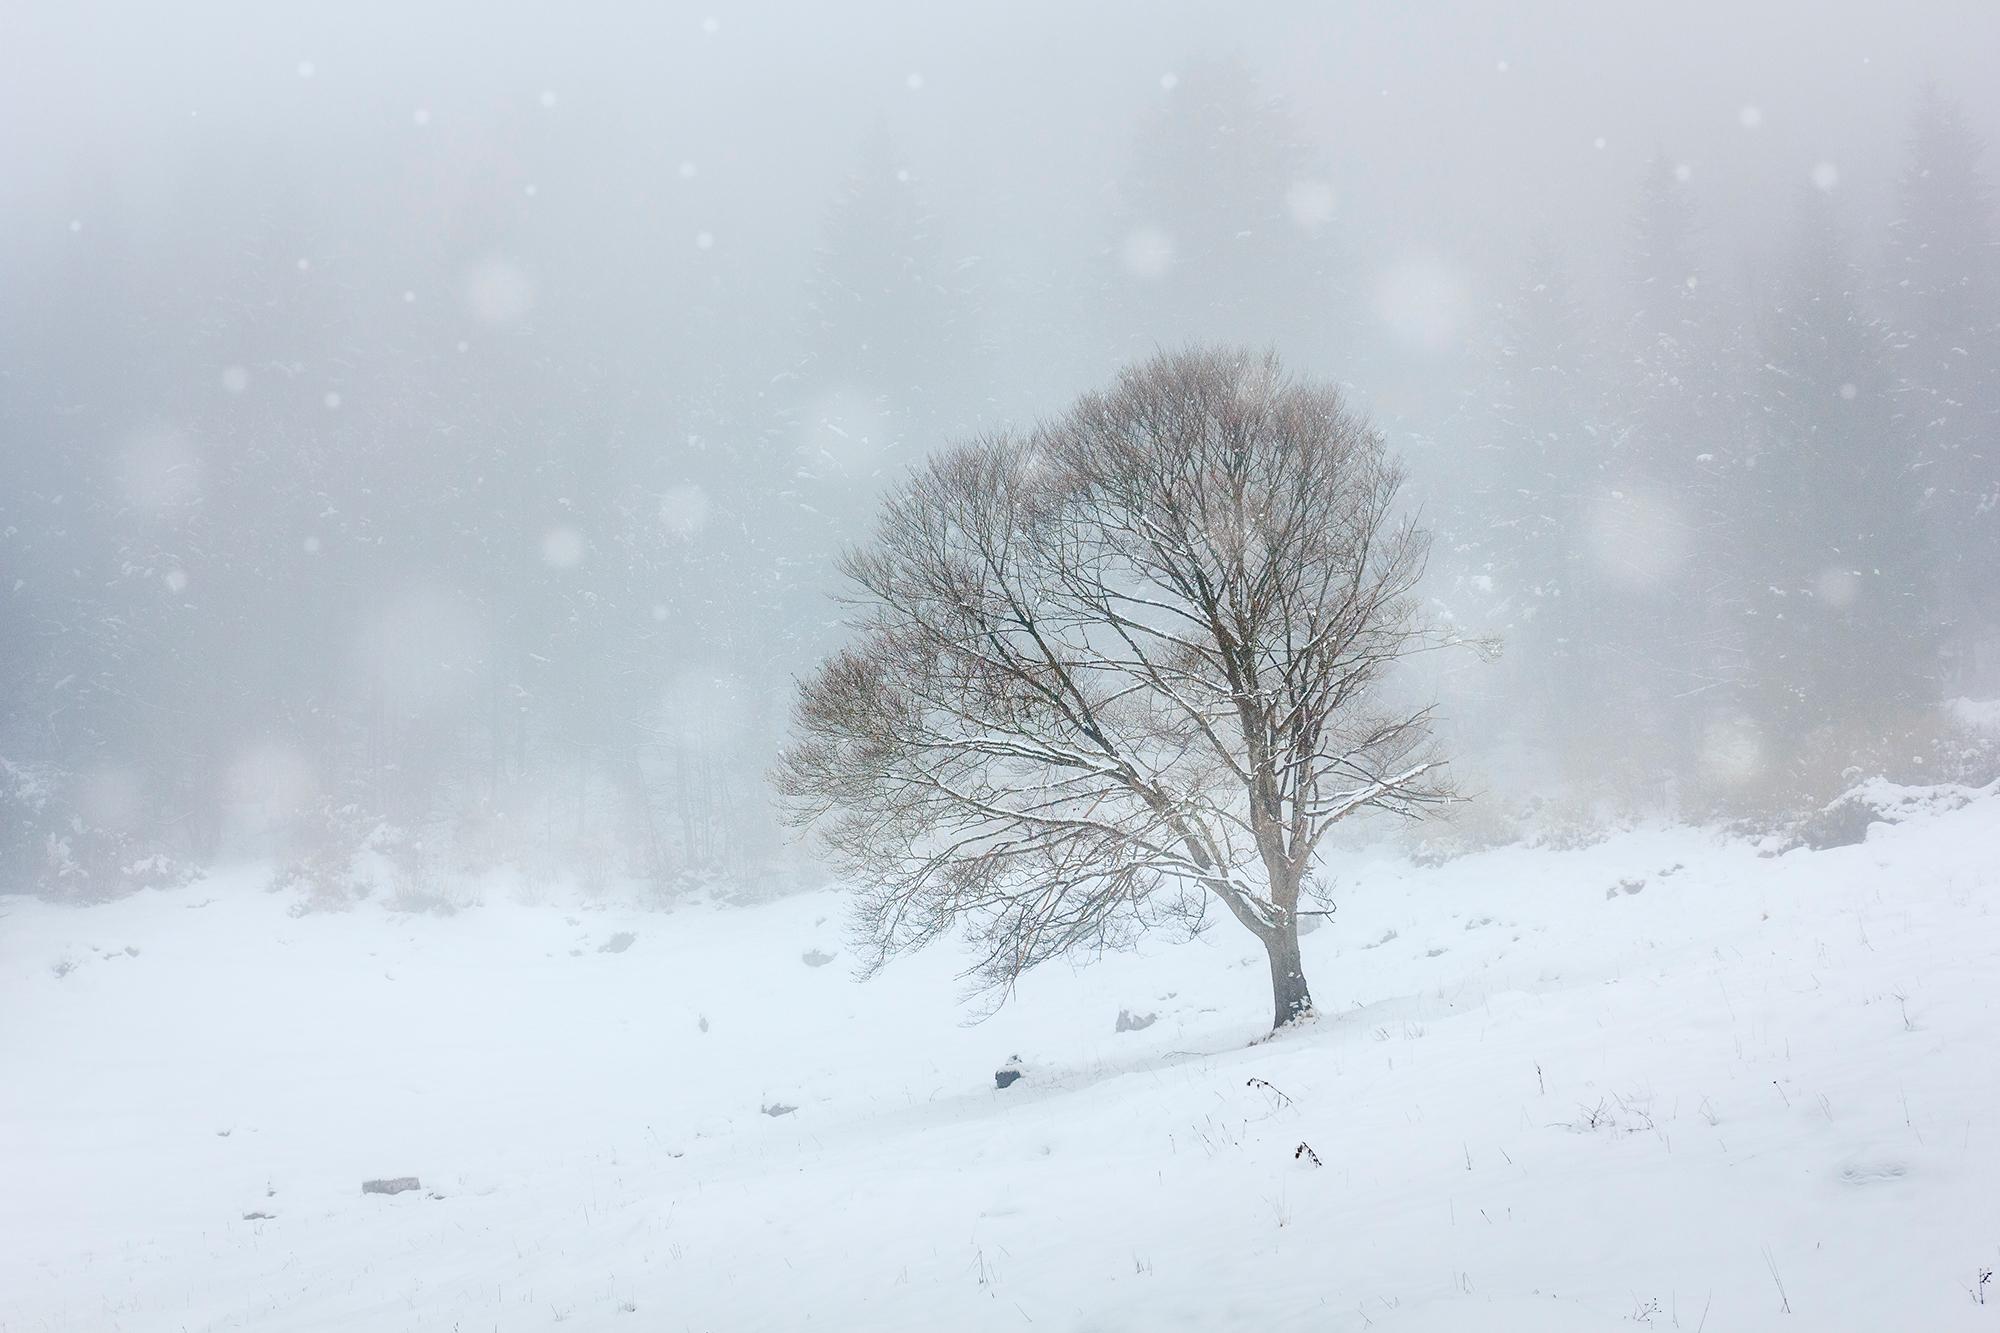 Adriana Benetti Longhini Color Photograph - Ghost Tree During a Snow Storm - 21st Century Contemporary Landscape photography